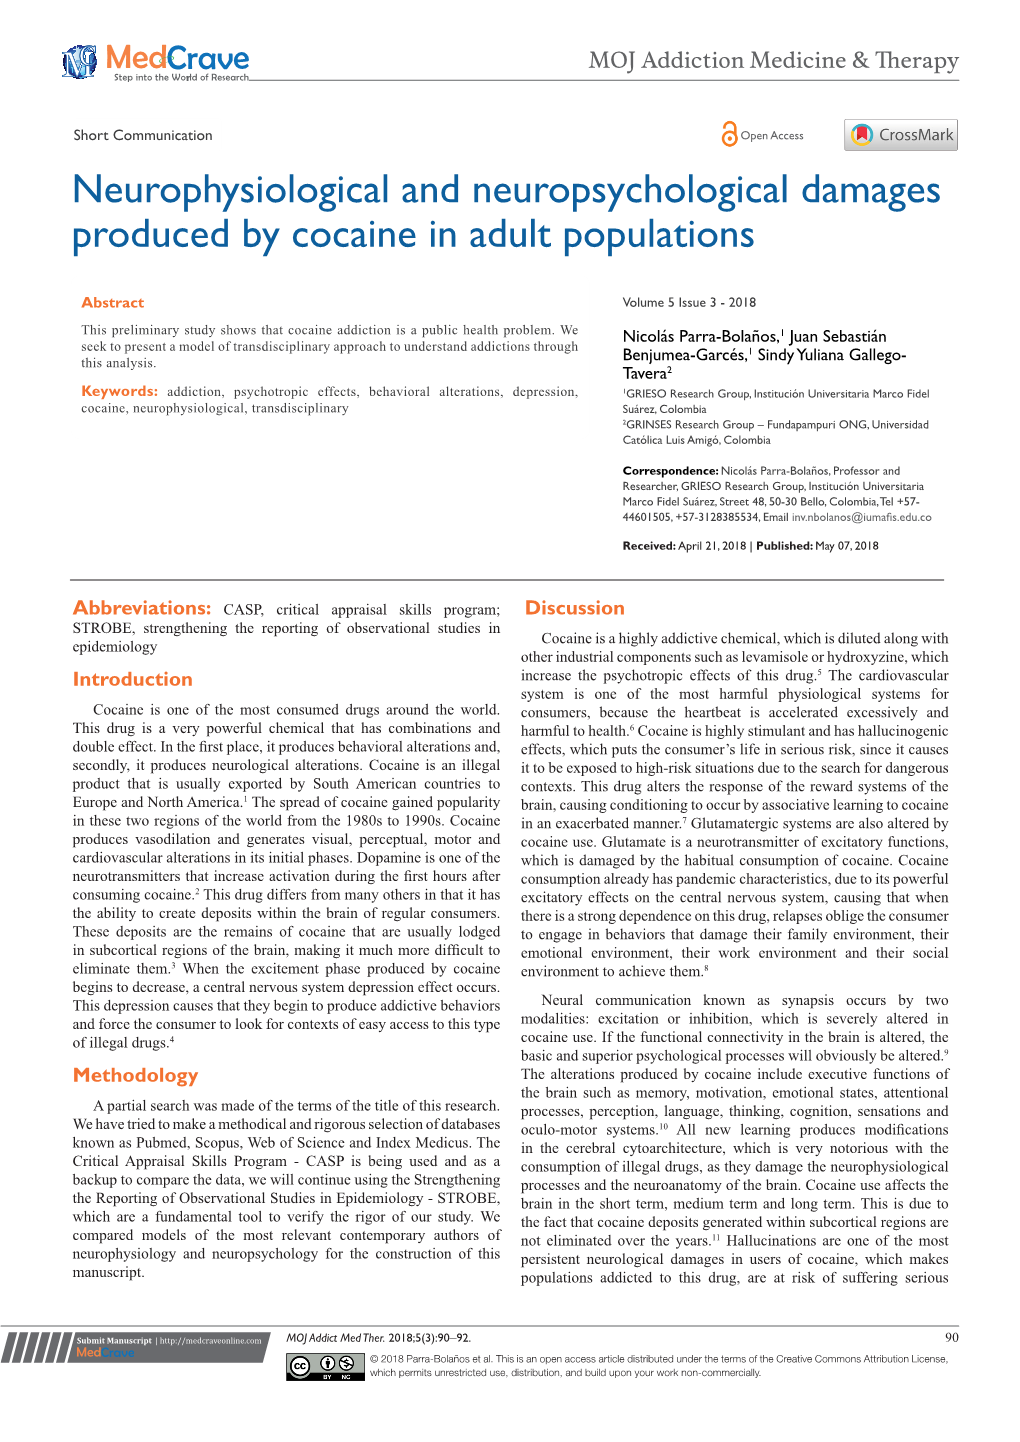 Neurophysiological and Neuropsychological Damages Produced by Cocaine in Adult Populations